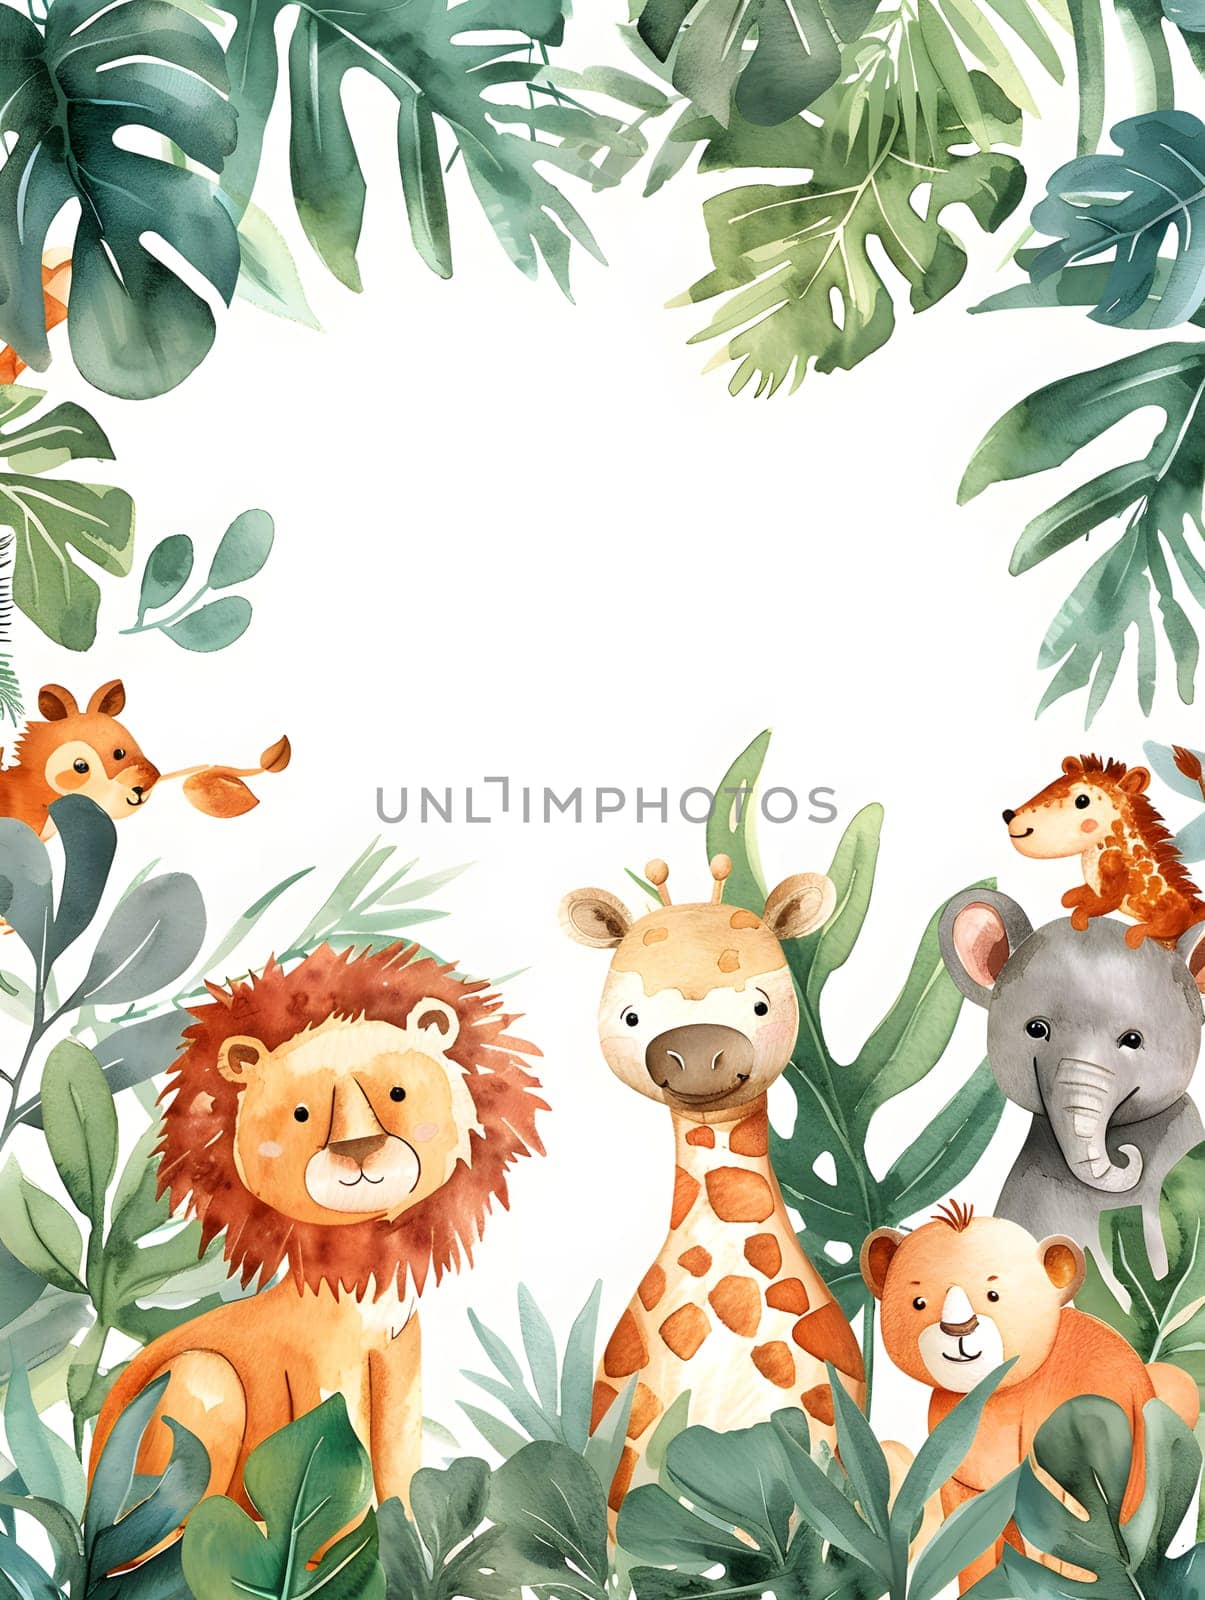 Four mammals lion, giraffe, elephant, and bear stand in the jungle by Nadtochiy